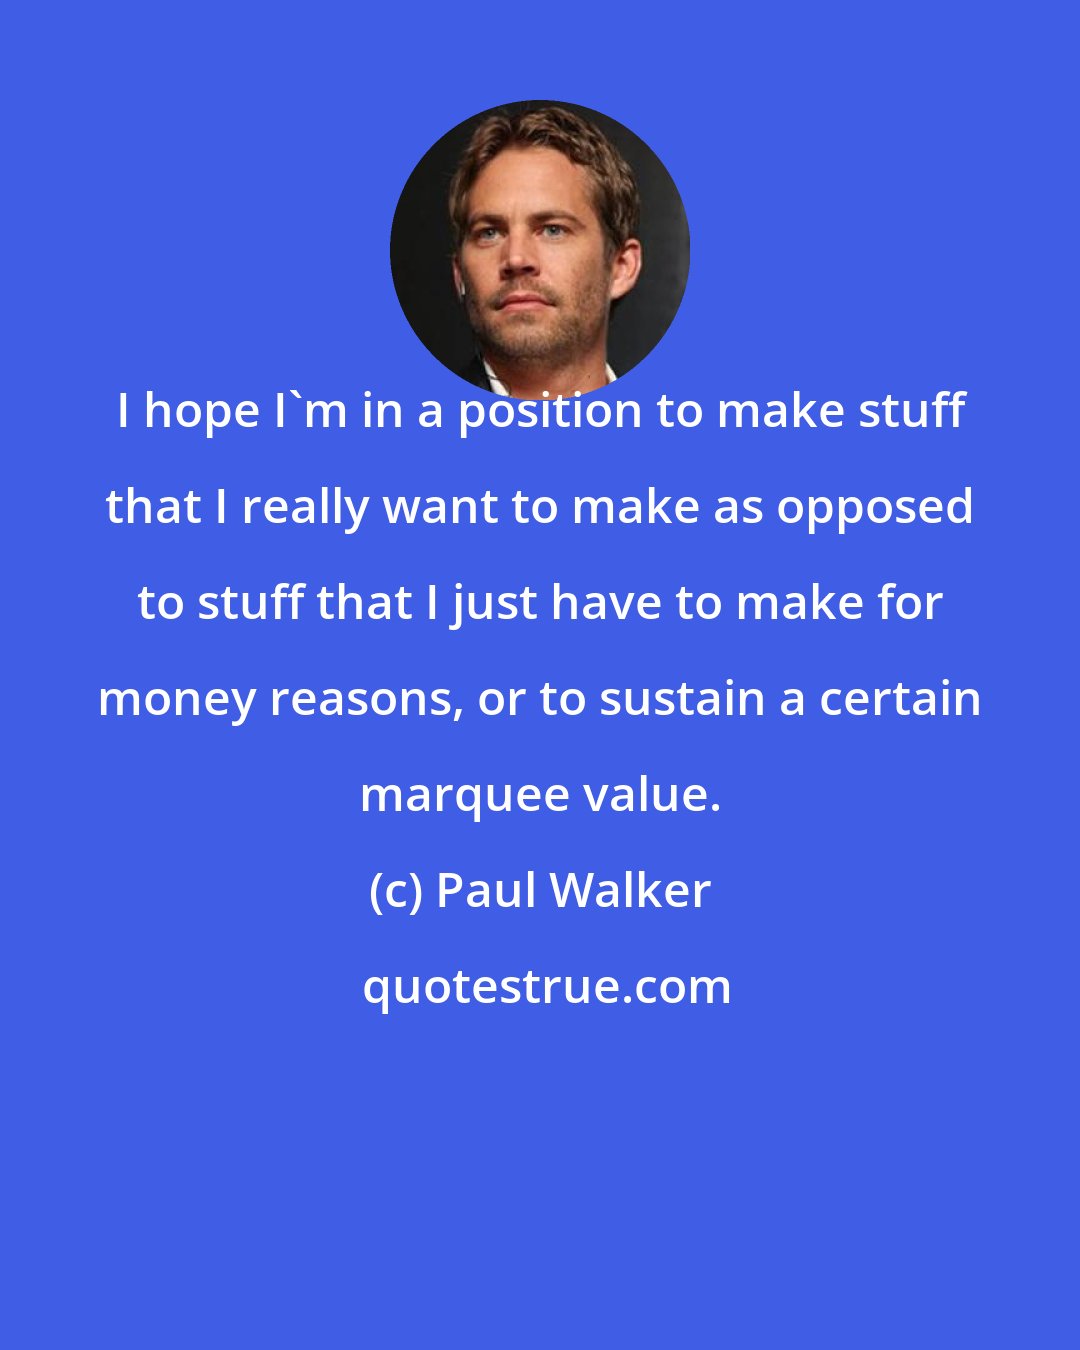 Paul Walker: I hope I'm in a position to make stuff that I really want to make as opposed to stuff that I just have to make for money reasons, or to sustain a certain marquee value.